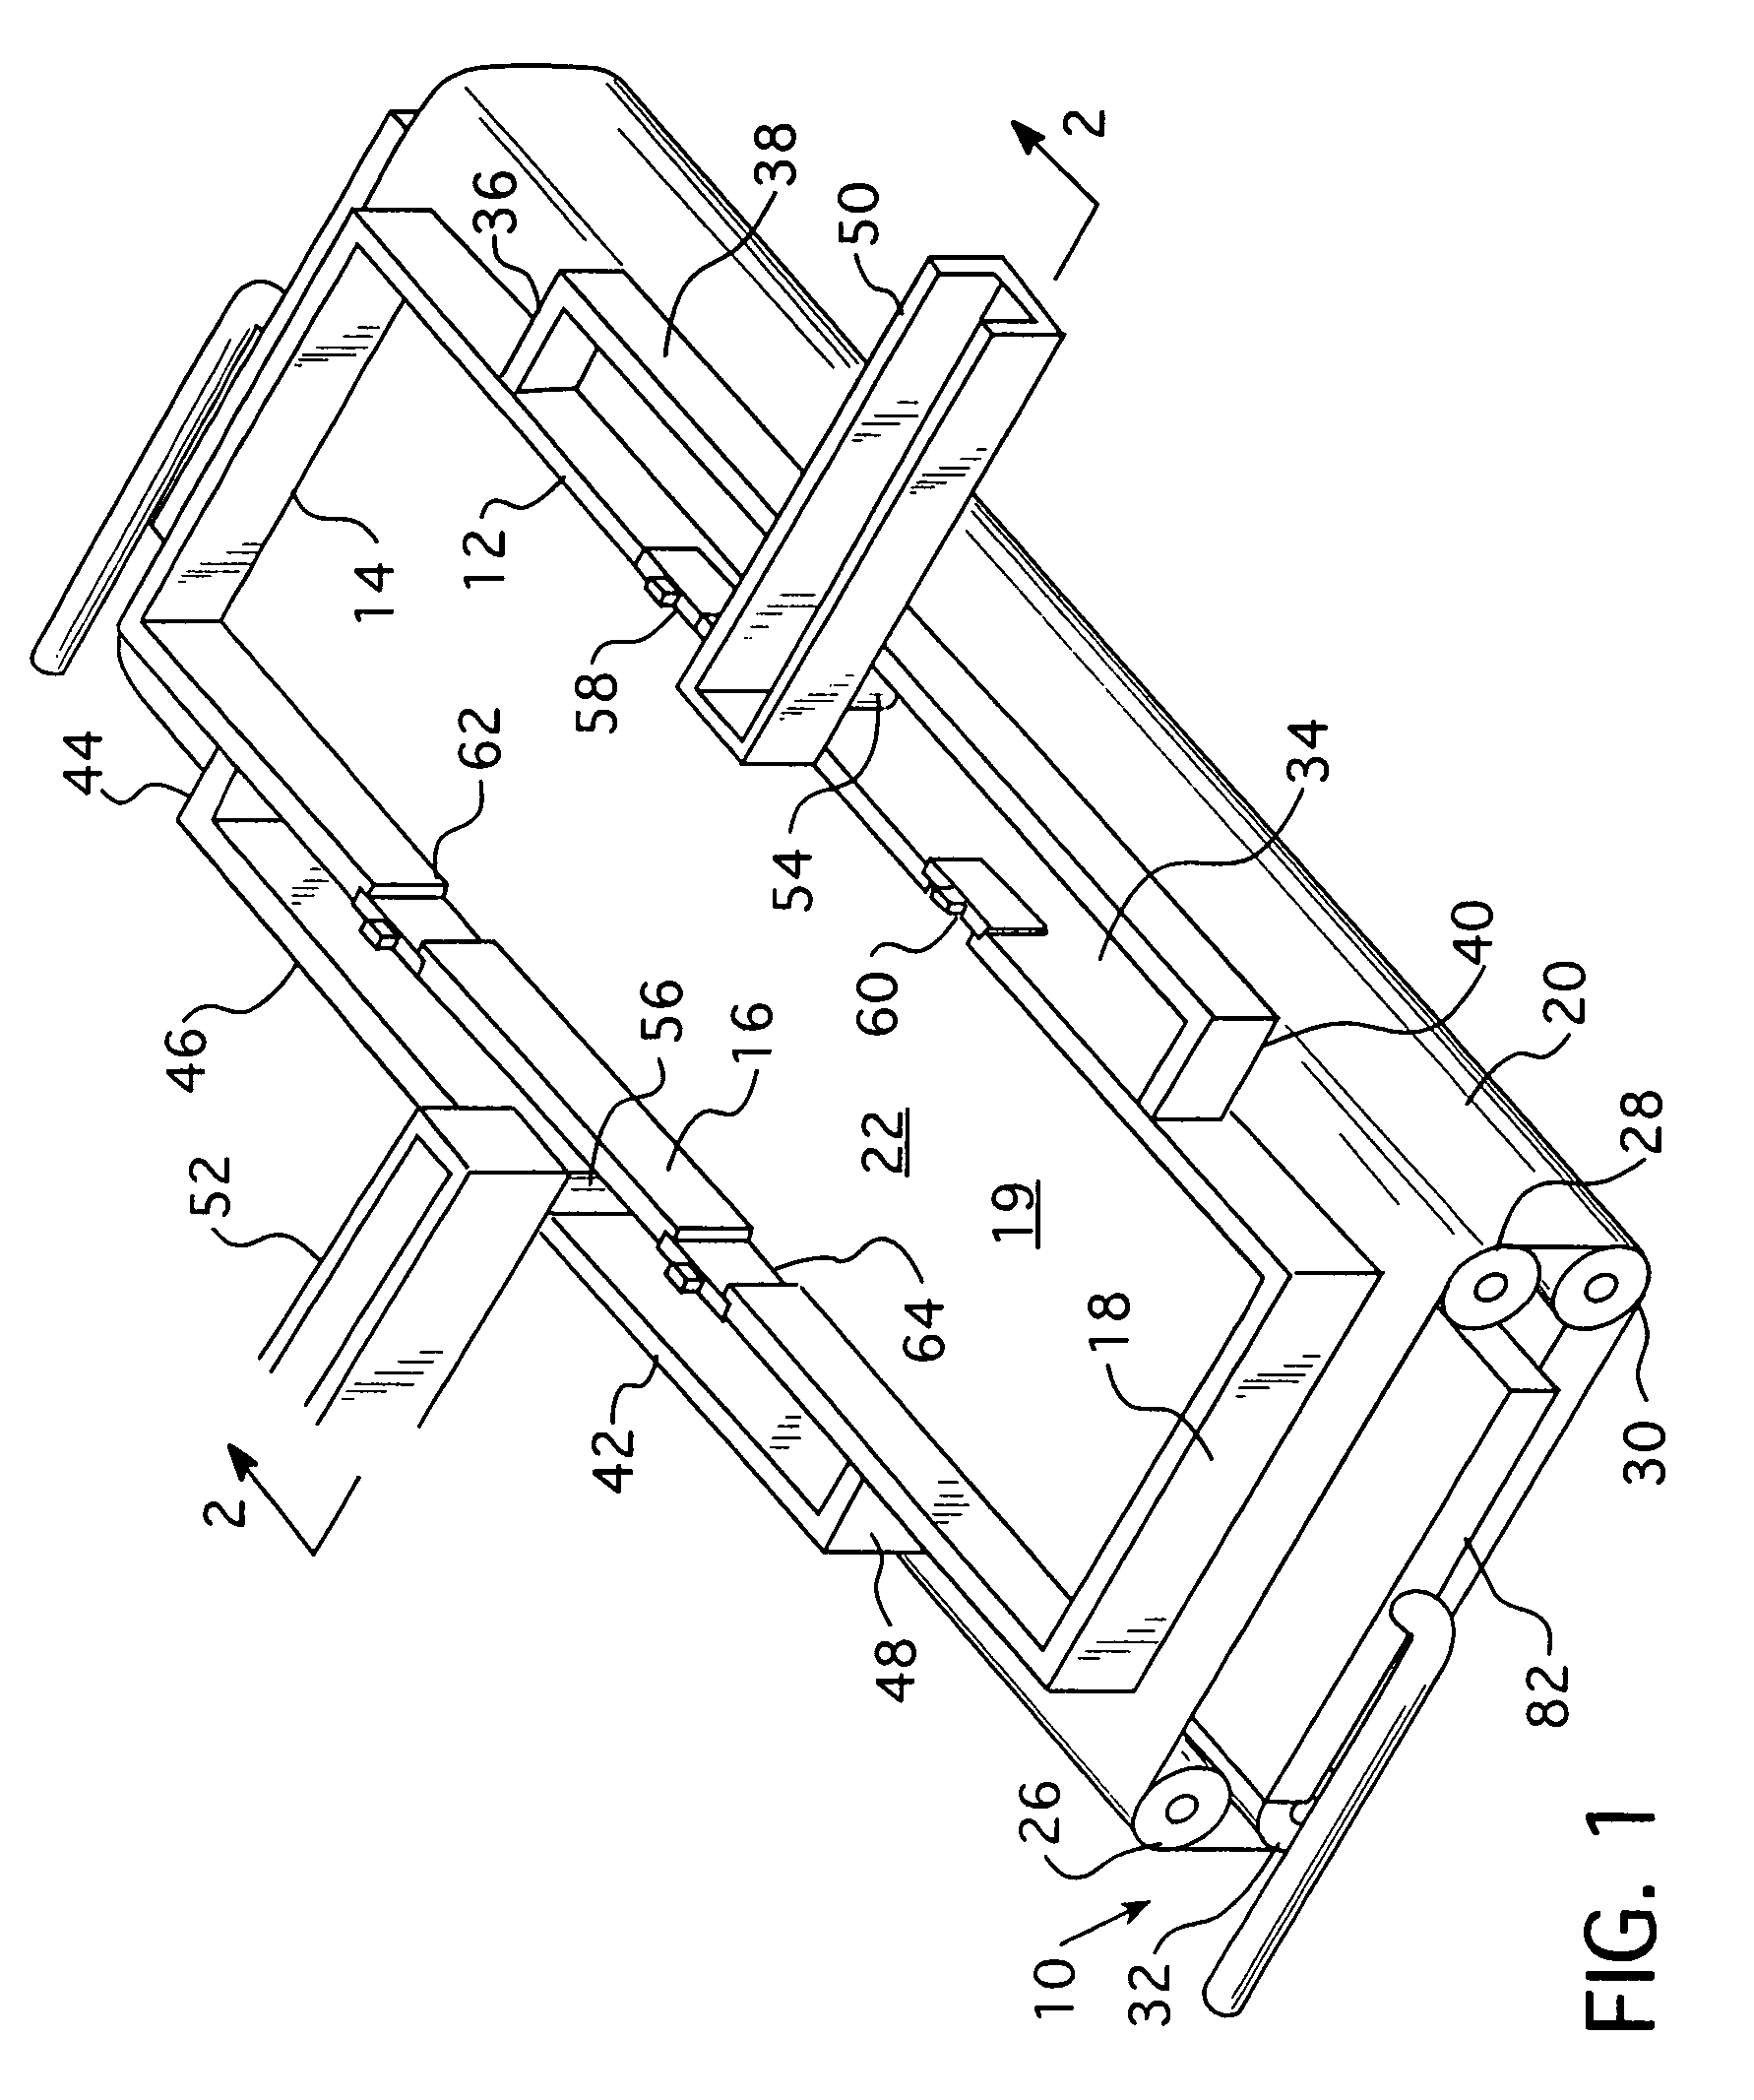 Method of unidirectional solidification of castings and associated apparatus